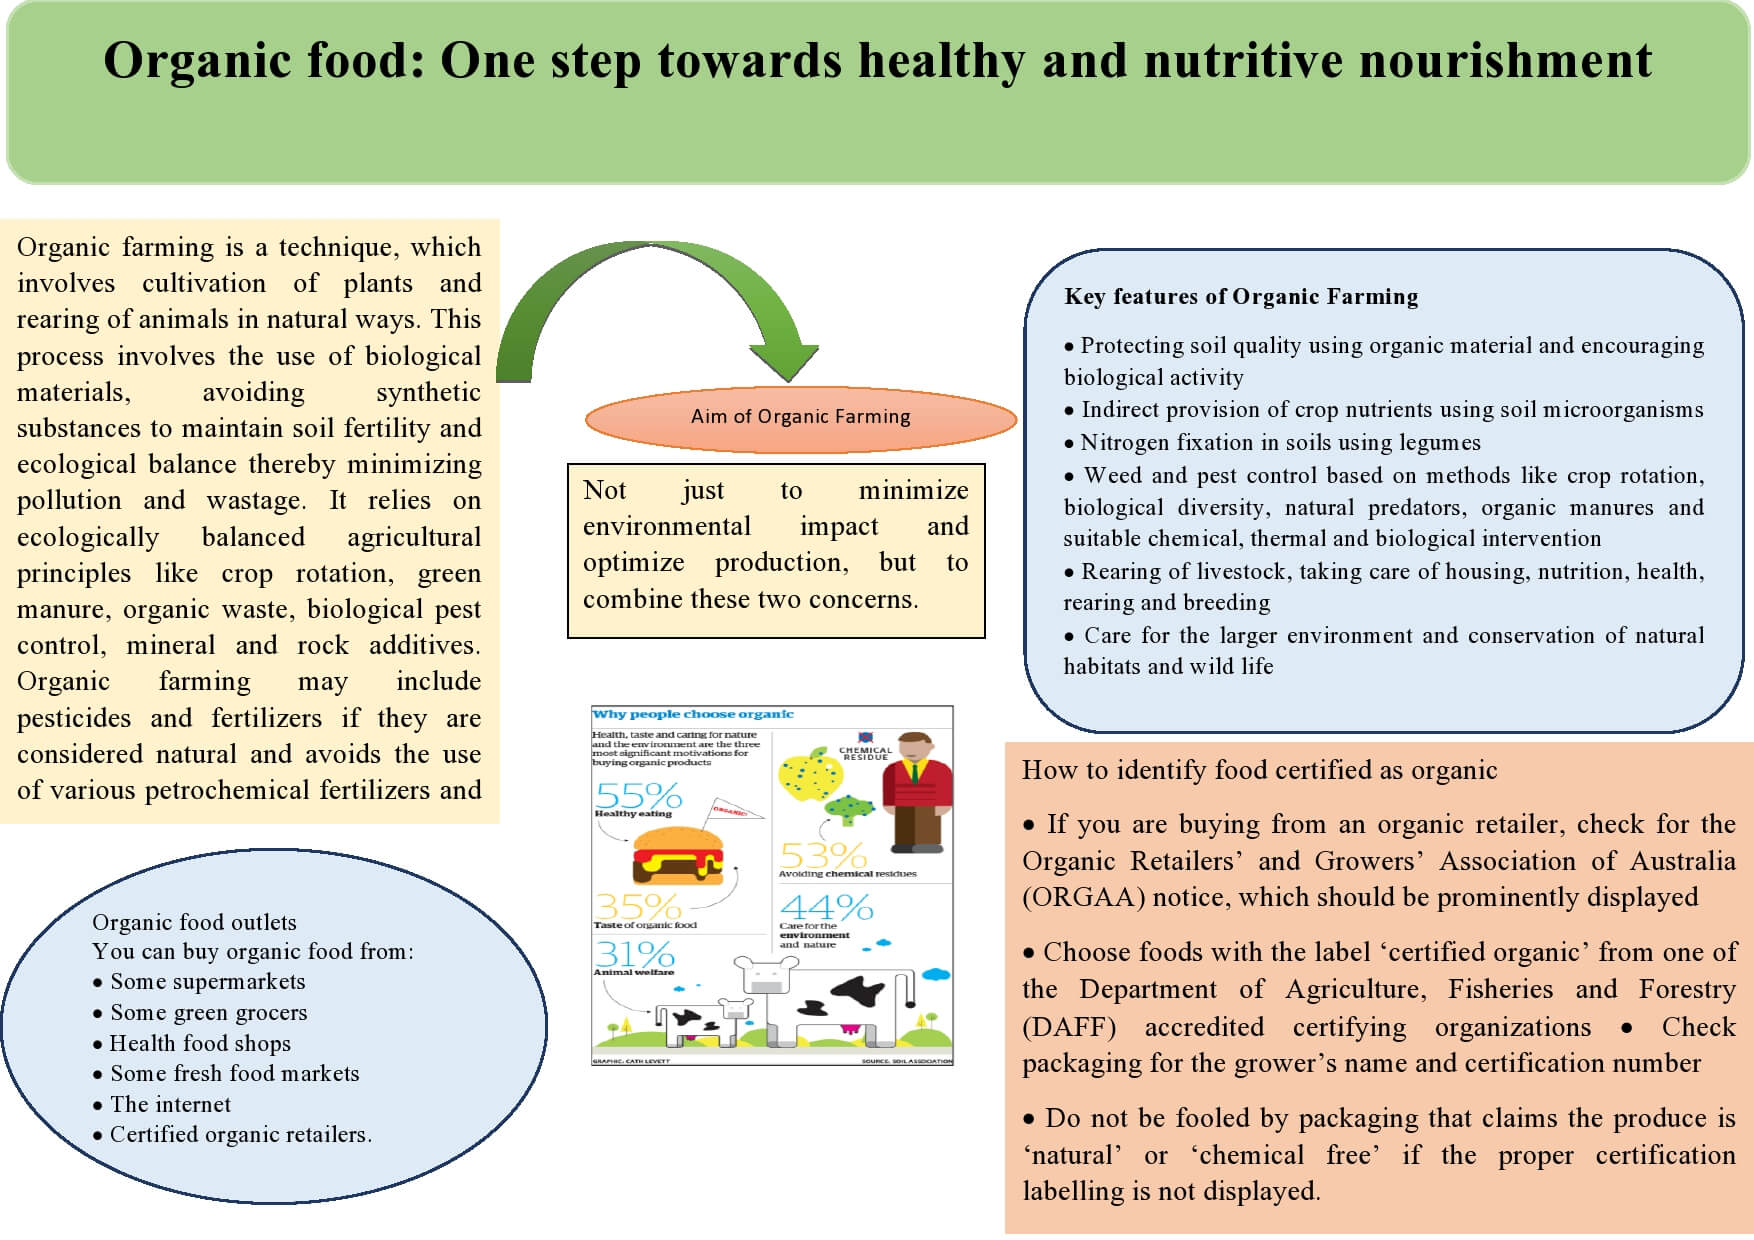 Organic food: One step towards healthy and nutritive nourishment